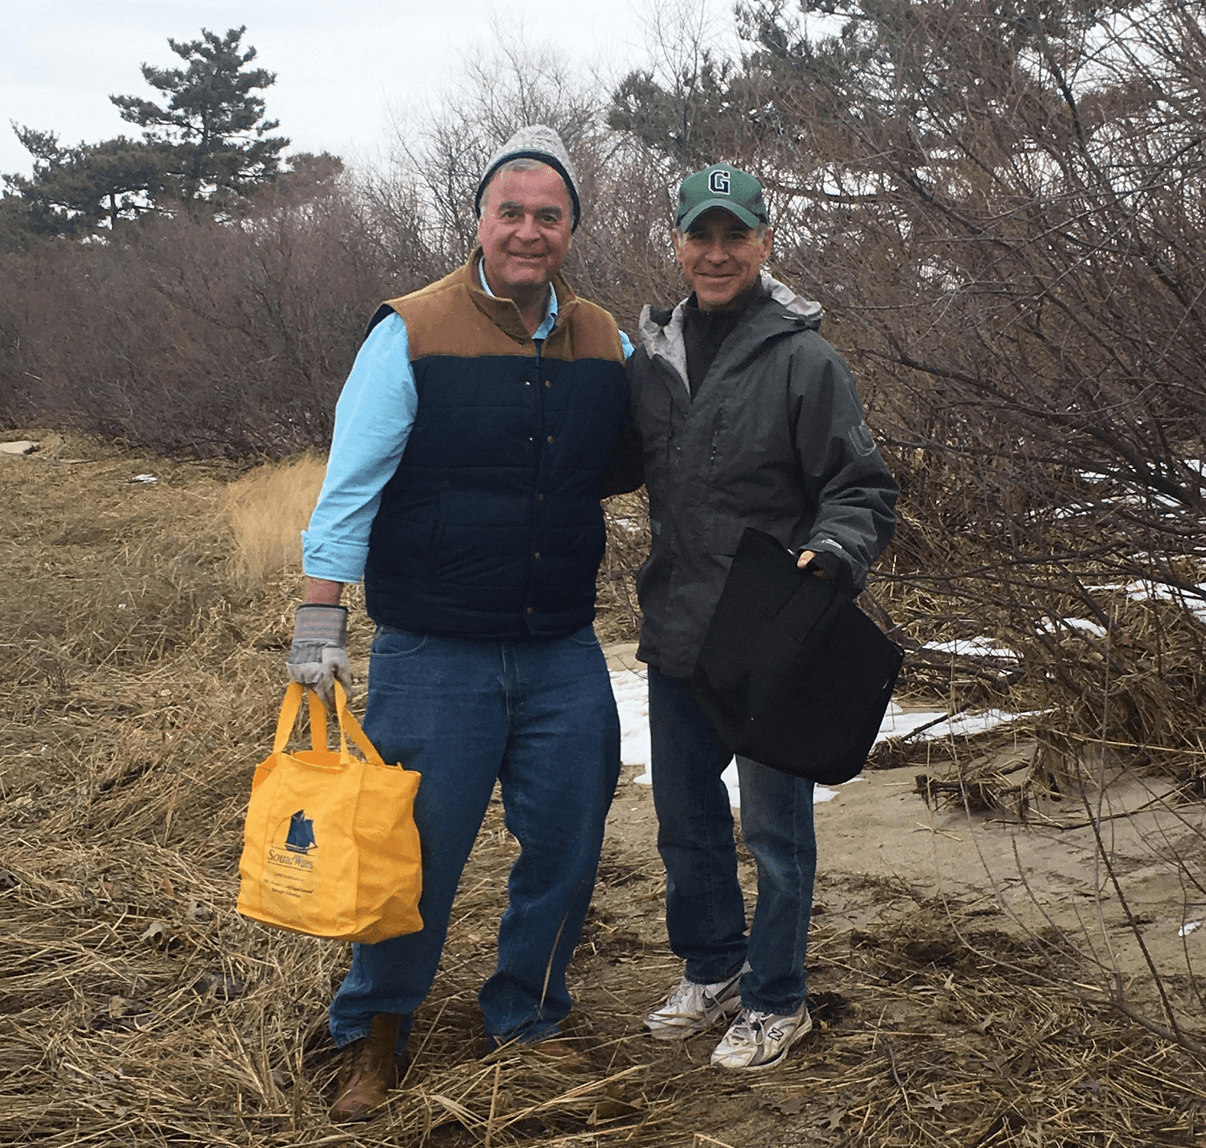 State Reps Steve Meskers and Fred Camillo at the beach cleanup at Tod's Pt. March 3, 2019 contributed photo